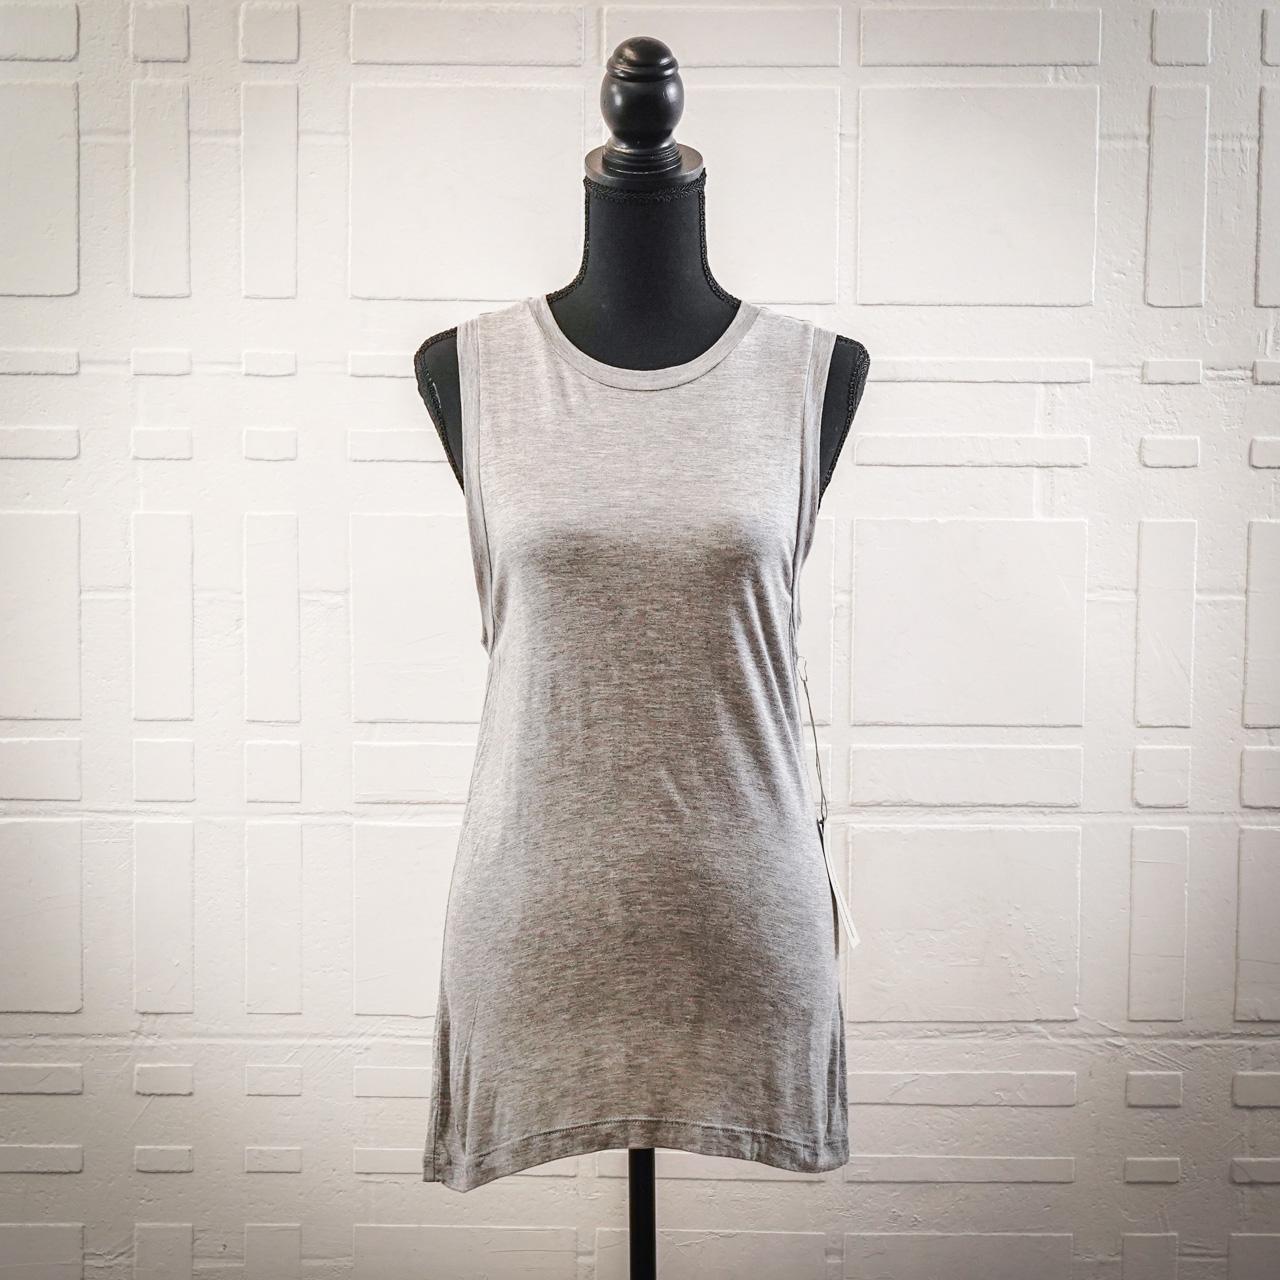 Getting Back To Square One Women's Grey Vest